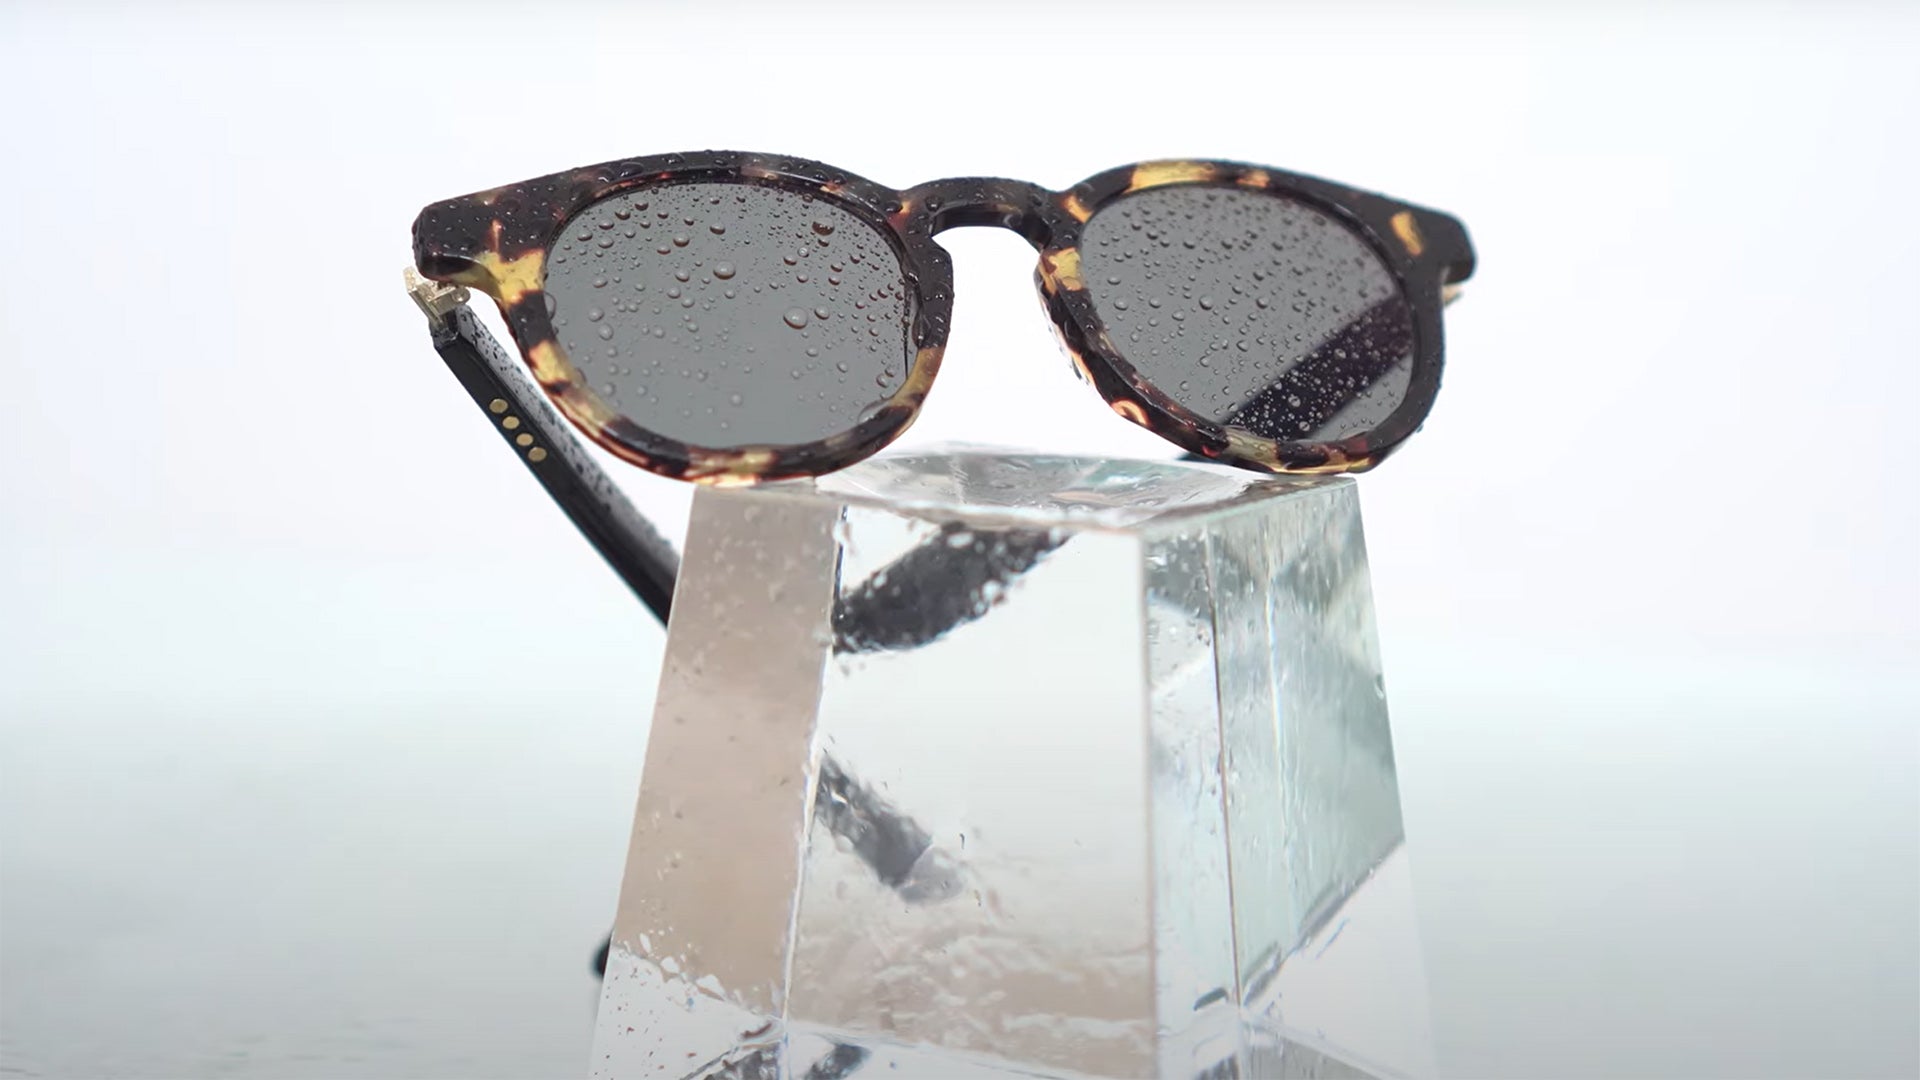 Vue Lite Cygnus glasses with drops of water, possibly rain or sweat, on them to indicate water resistance